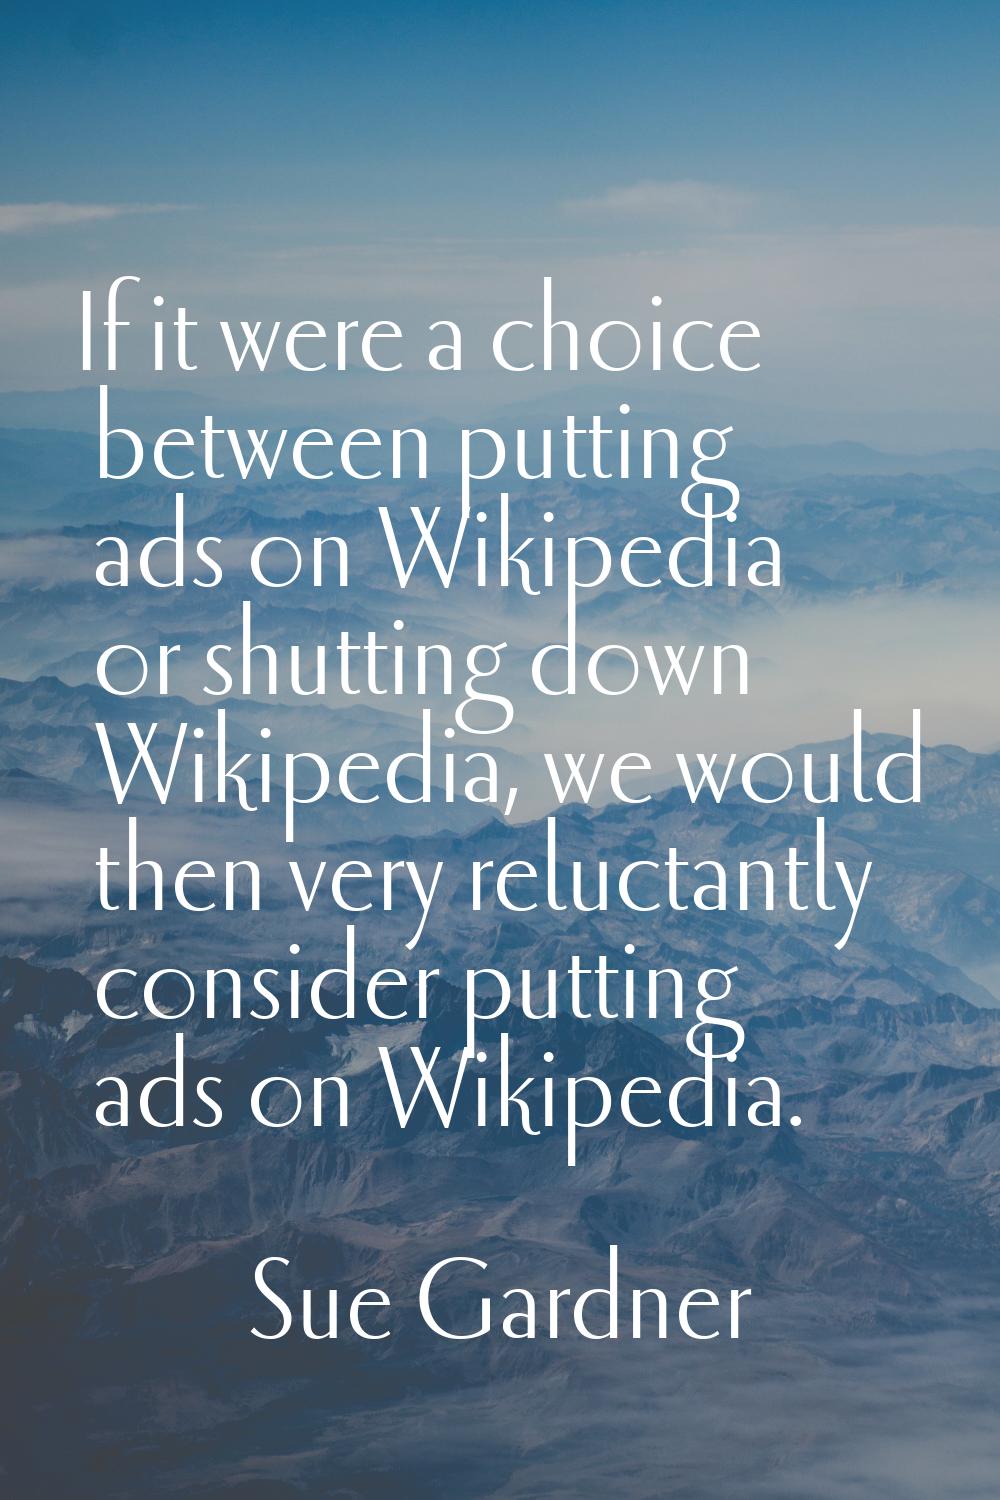 If it were a choice between putting ads on Wikipedia or shutting down Wikipedia, we would then very